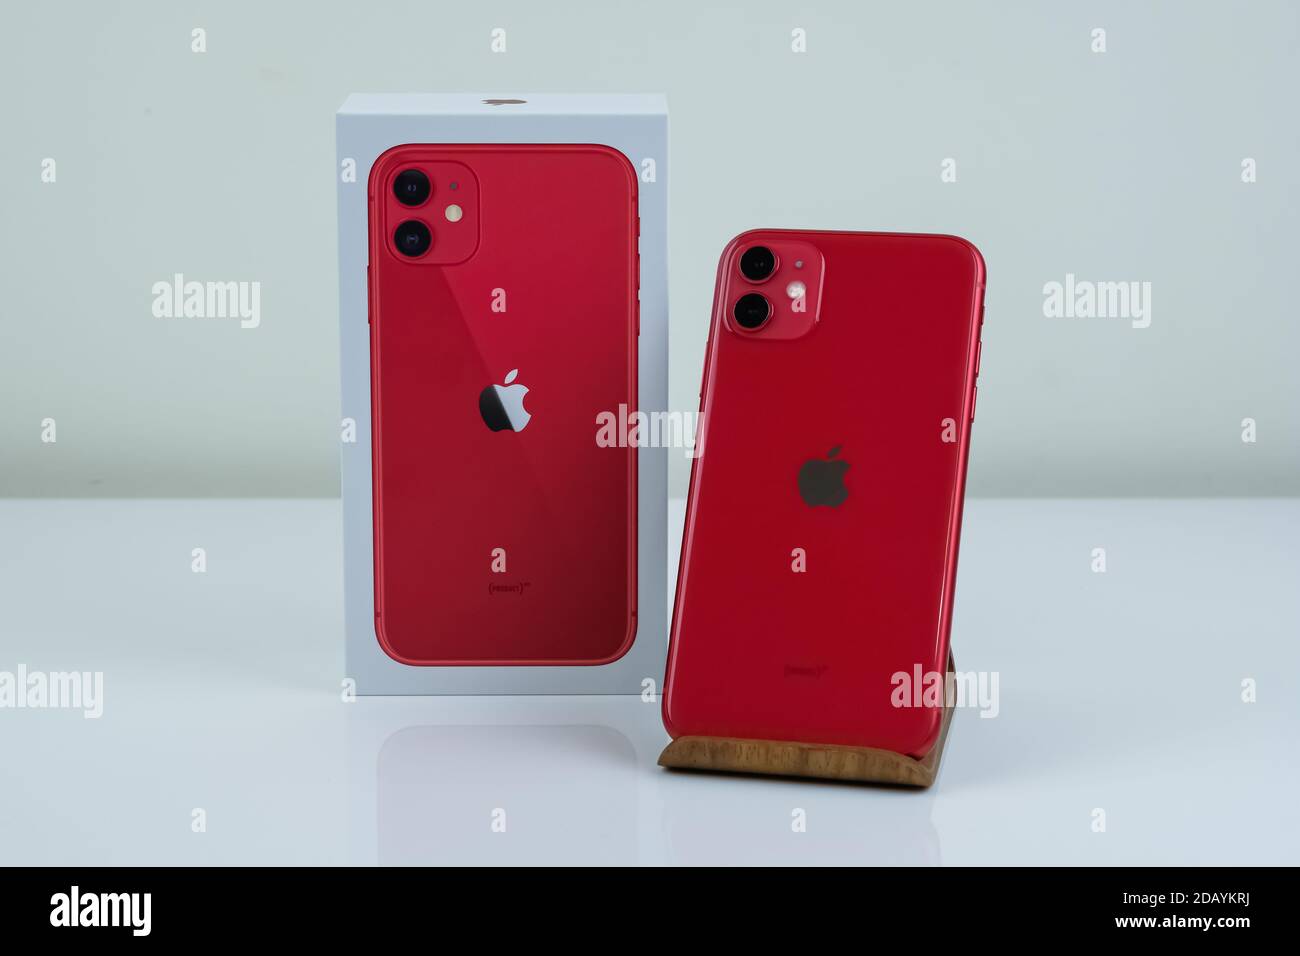 Iphone 11 In Red Next To Its Box Stock Photo Alamy